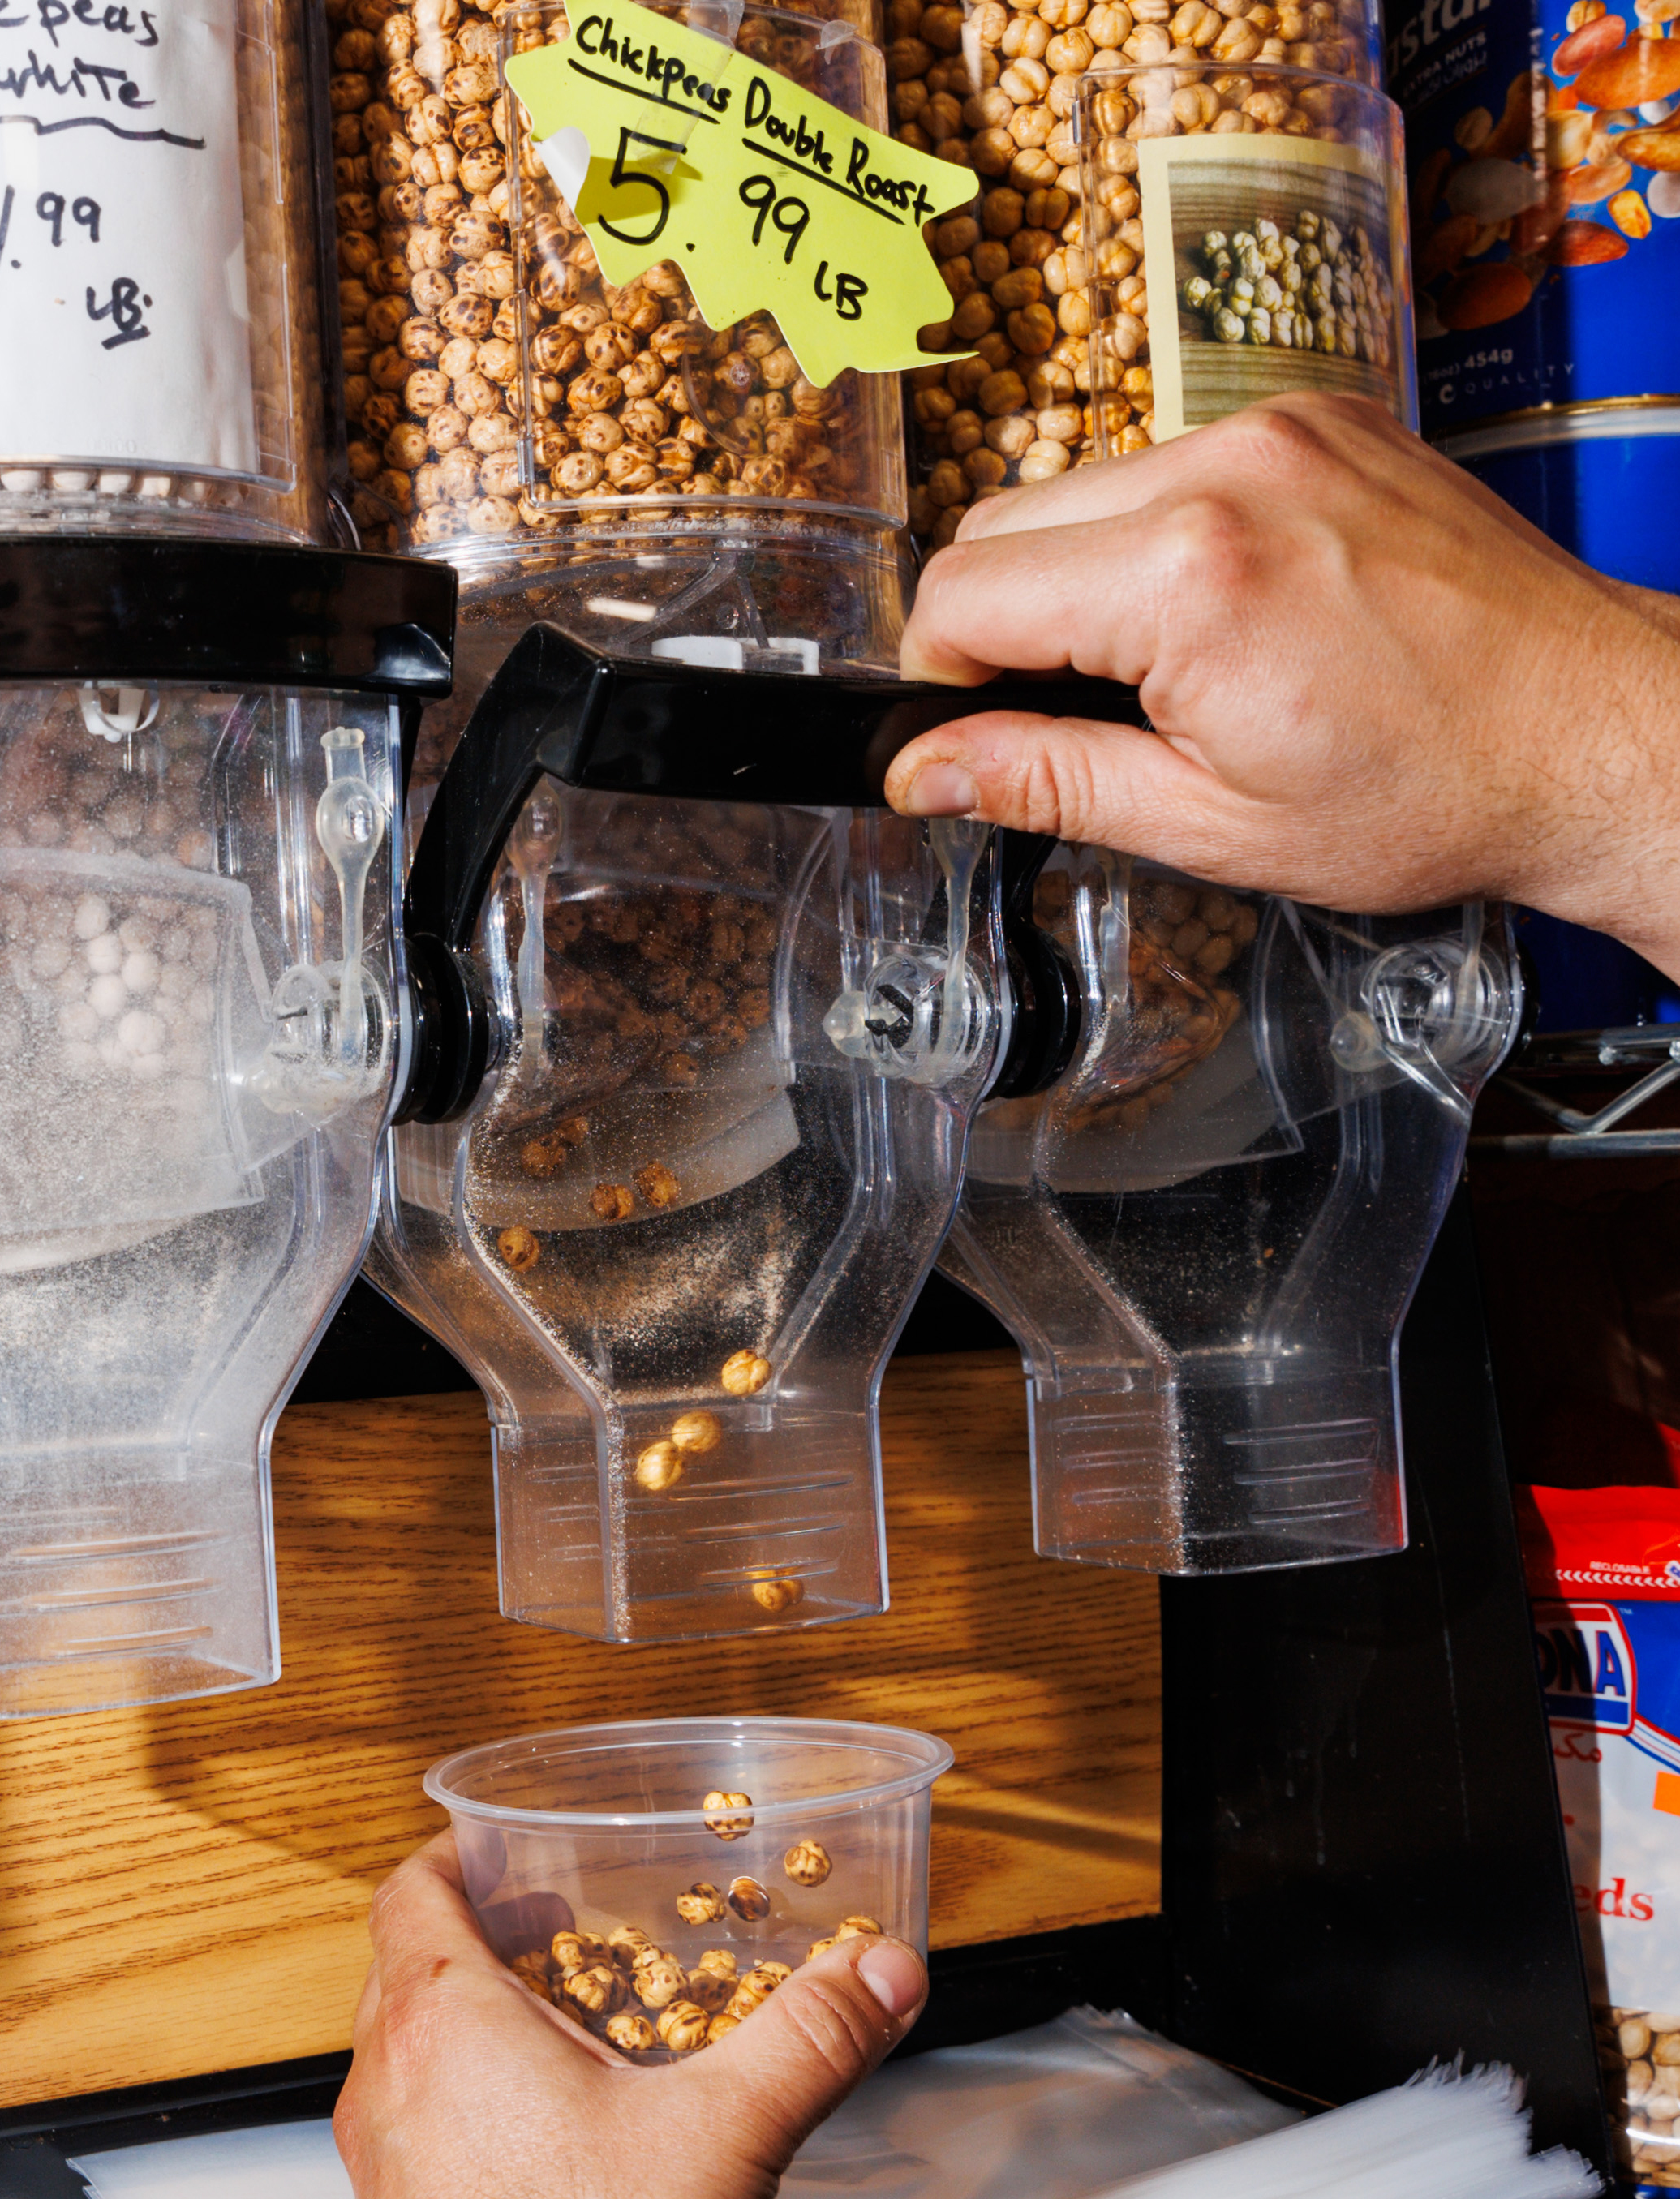 A hand dispenses &quot;Chickpeas Double Roast&quot; from a bulk bin into a plastic container, with a price sign showing $5.99 per pound.